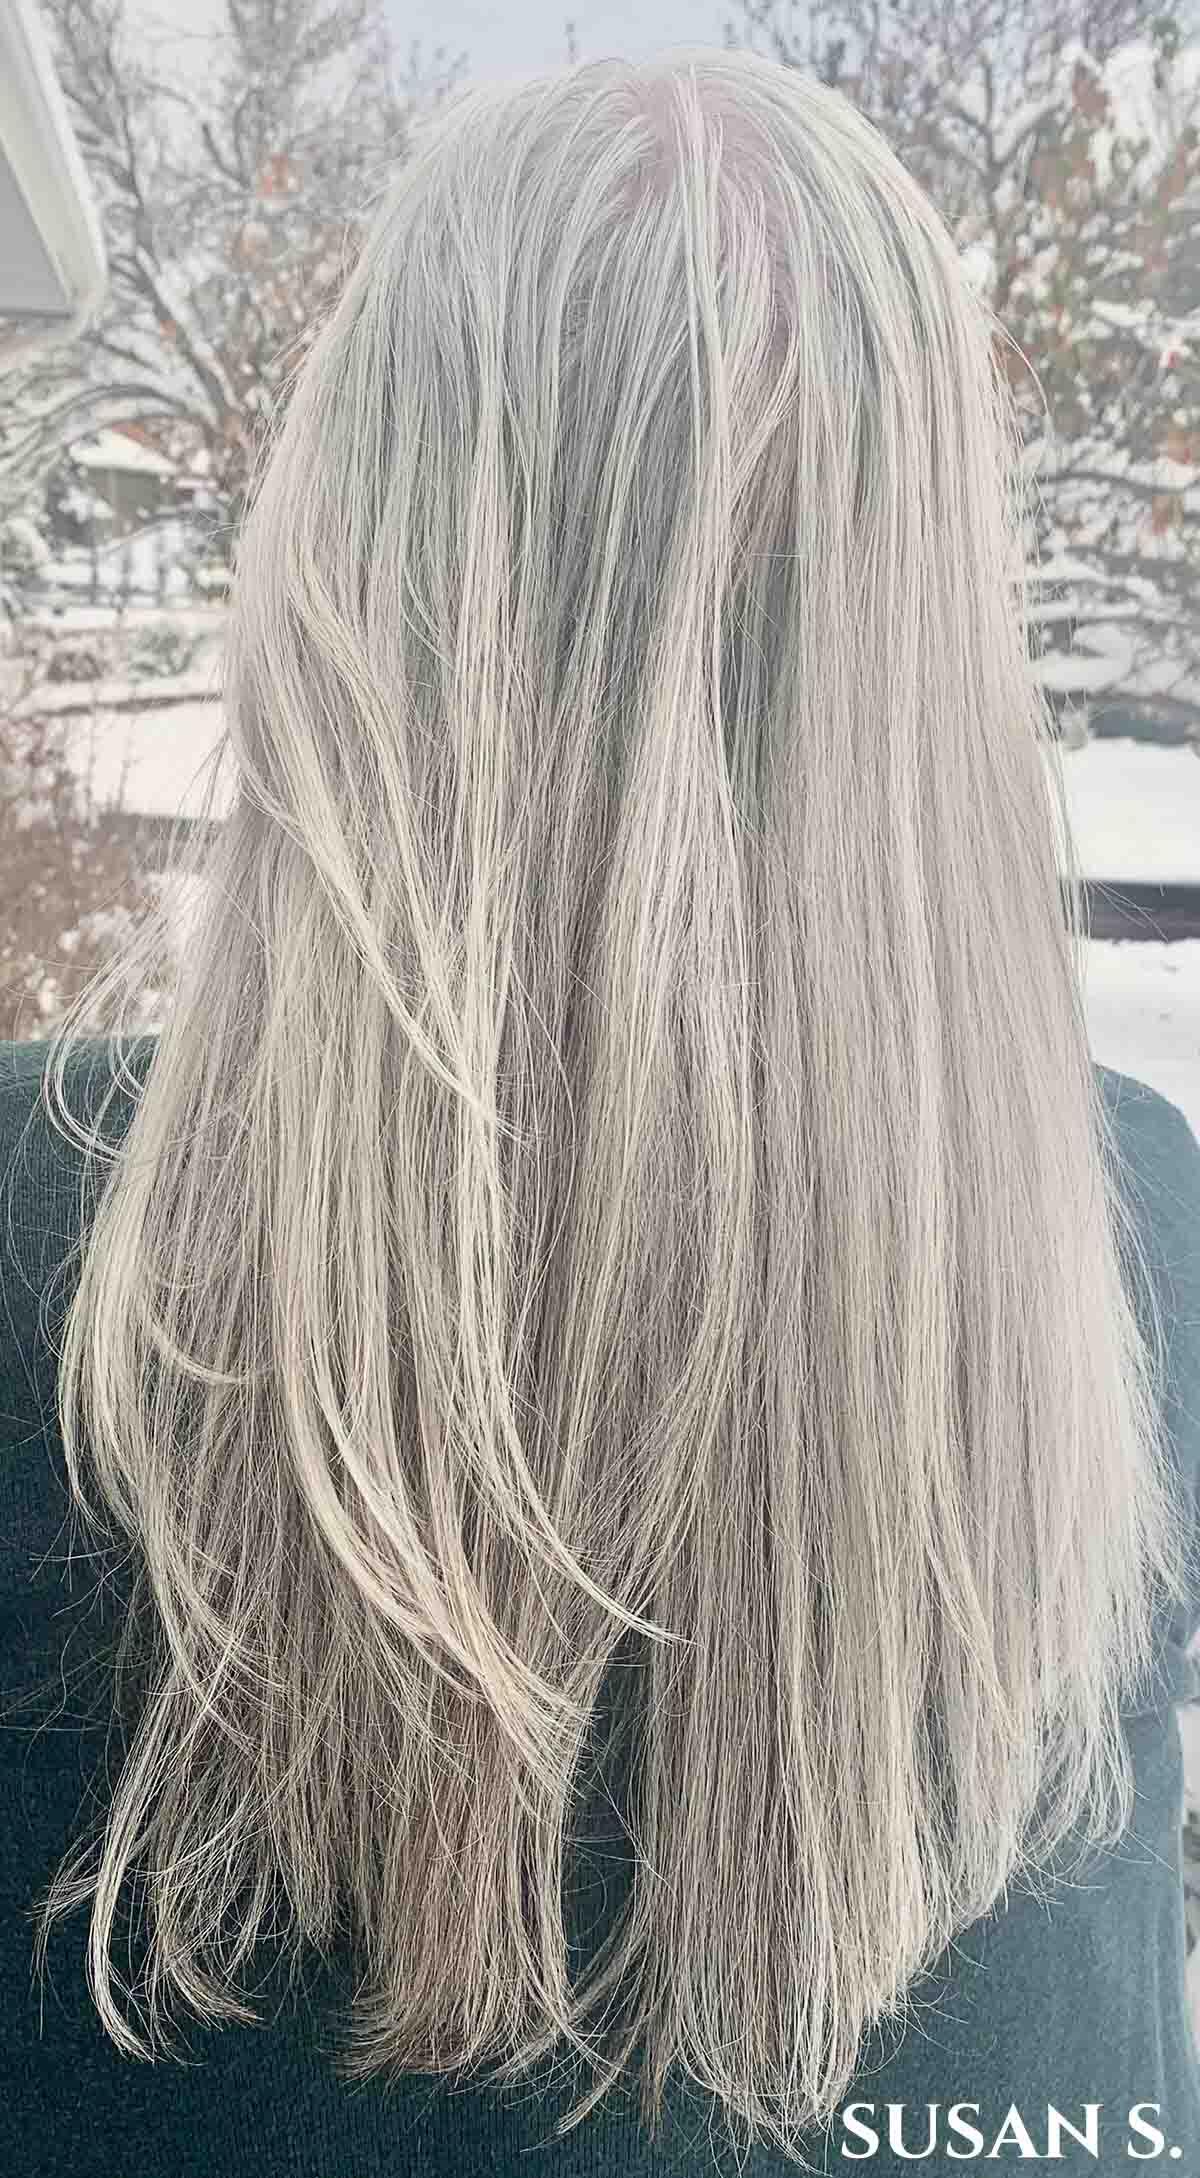 Woman facing away with mid back length straight white hair.